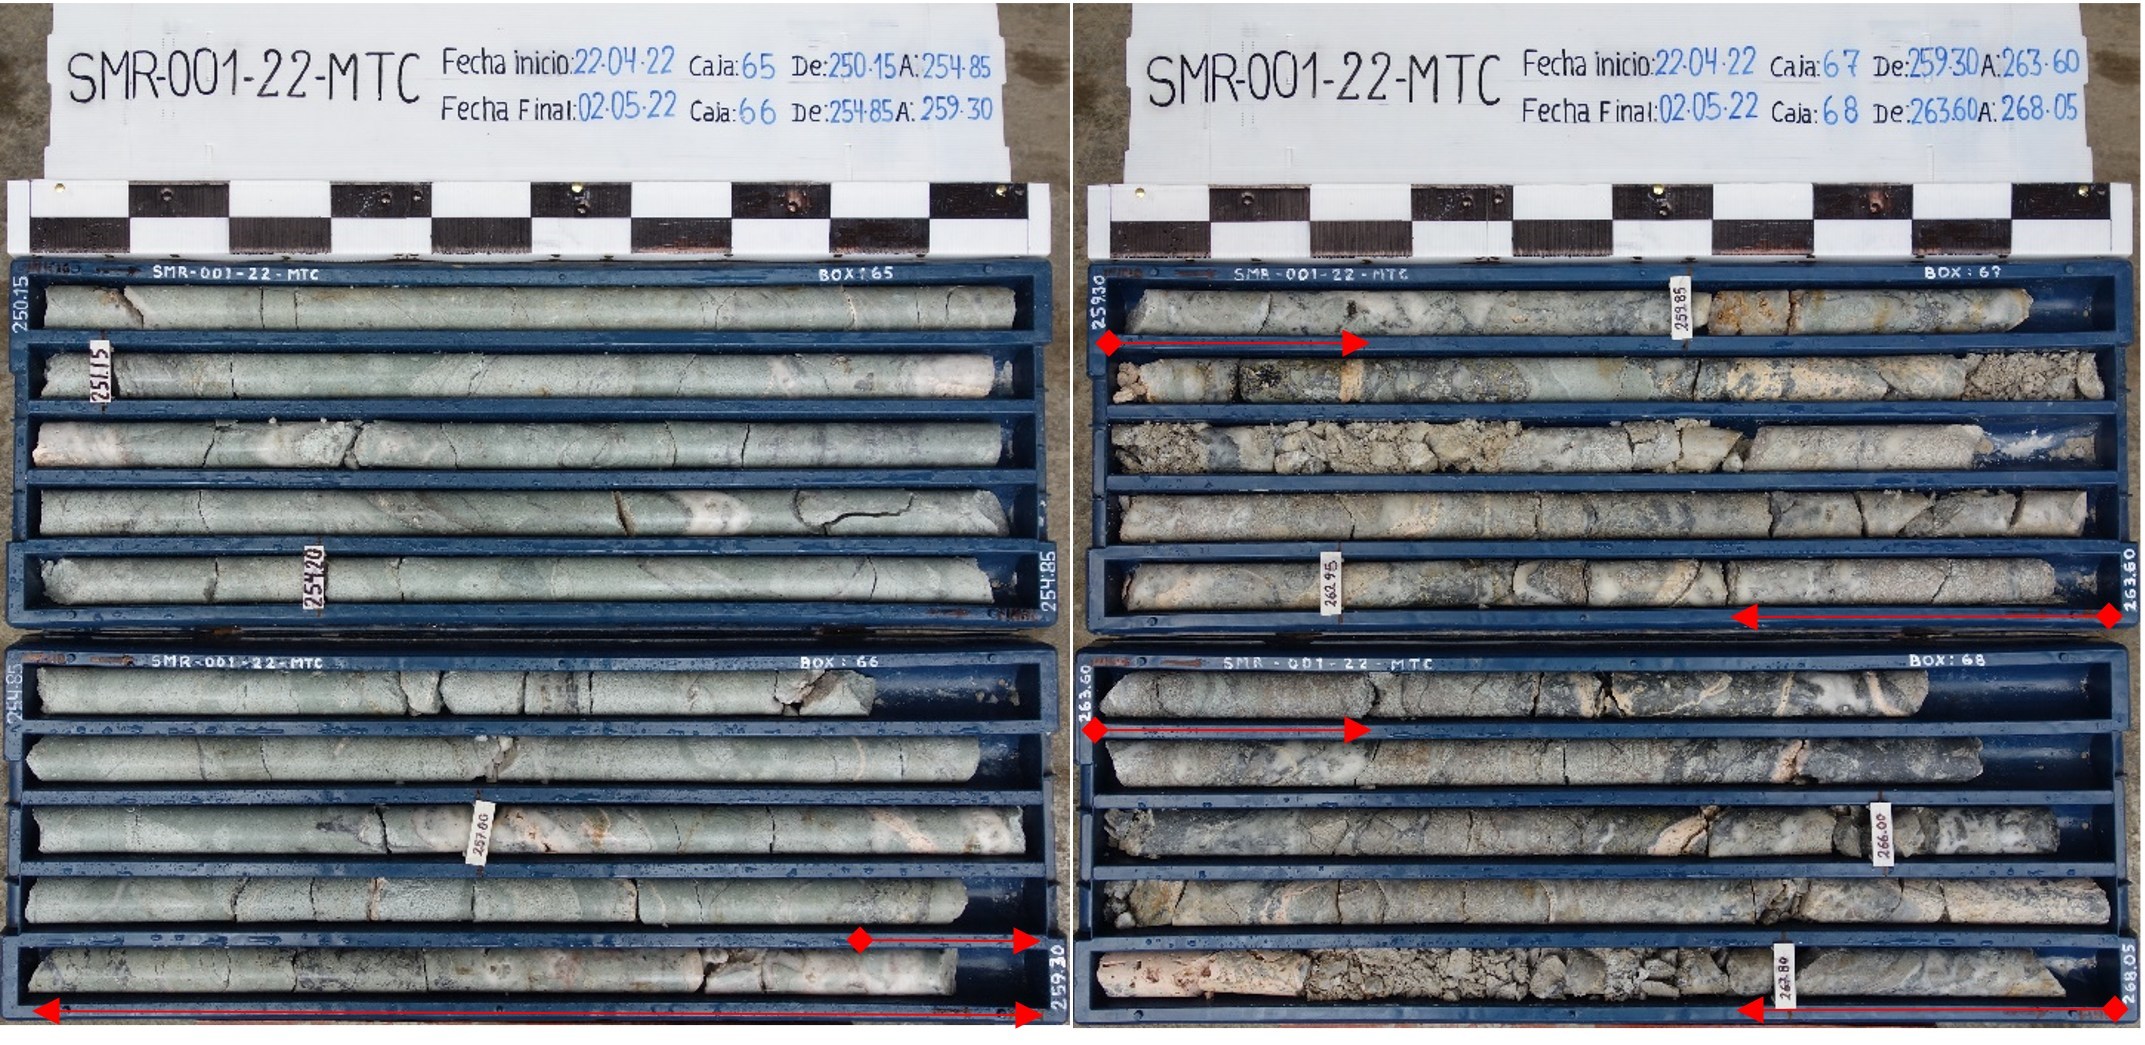 Fig.5: Drill hole SMR-01-22-MTC, core boxes 65 to 68, displaying interval from 250.15 m to 268.05 m depth; based on drill core observations, the mineralized zone starts at 258.20 m down-hole (indicated by red arrow) and extends to 270.15 m beyond the end of core box 68 shown on the bottom right (CNW Group/Silver Mountain Resources Inc.)